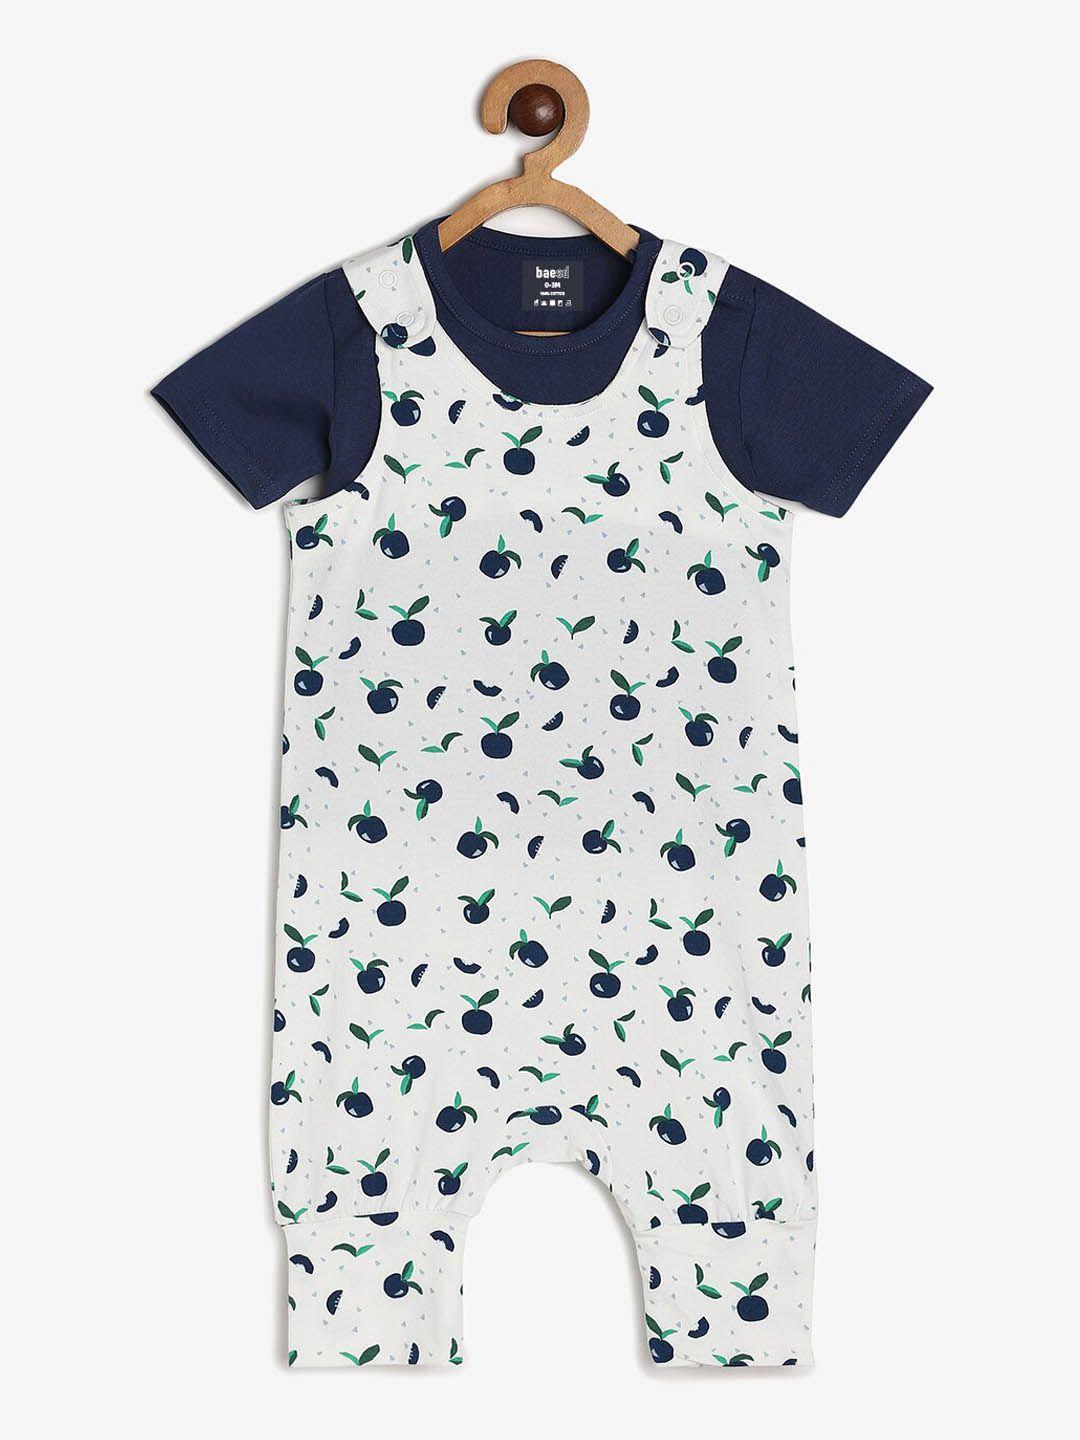 baesd-infant-conversational-printed-pure-cotton-dungaree